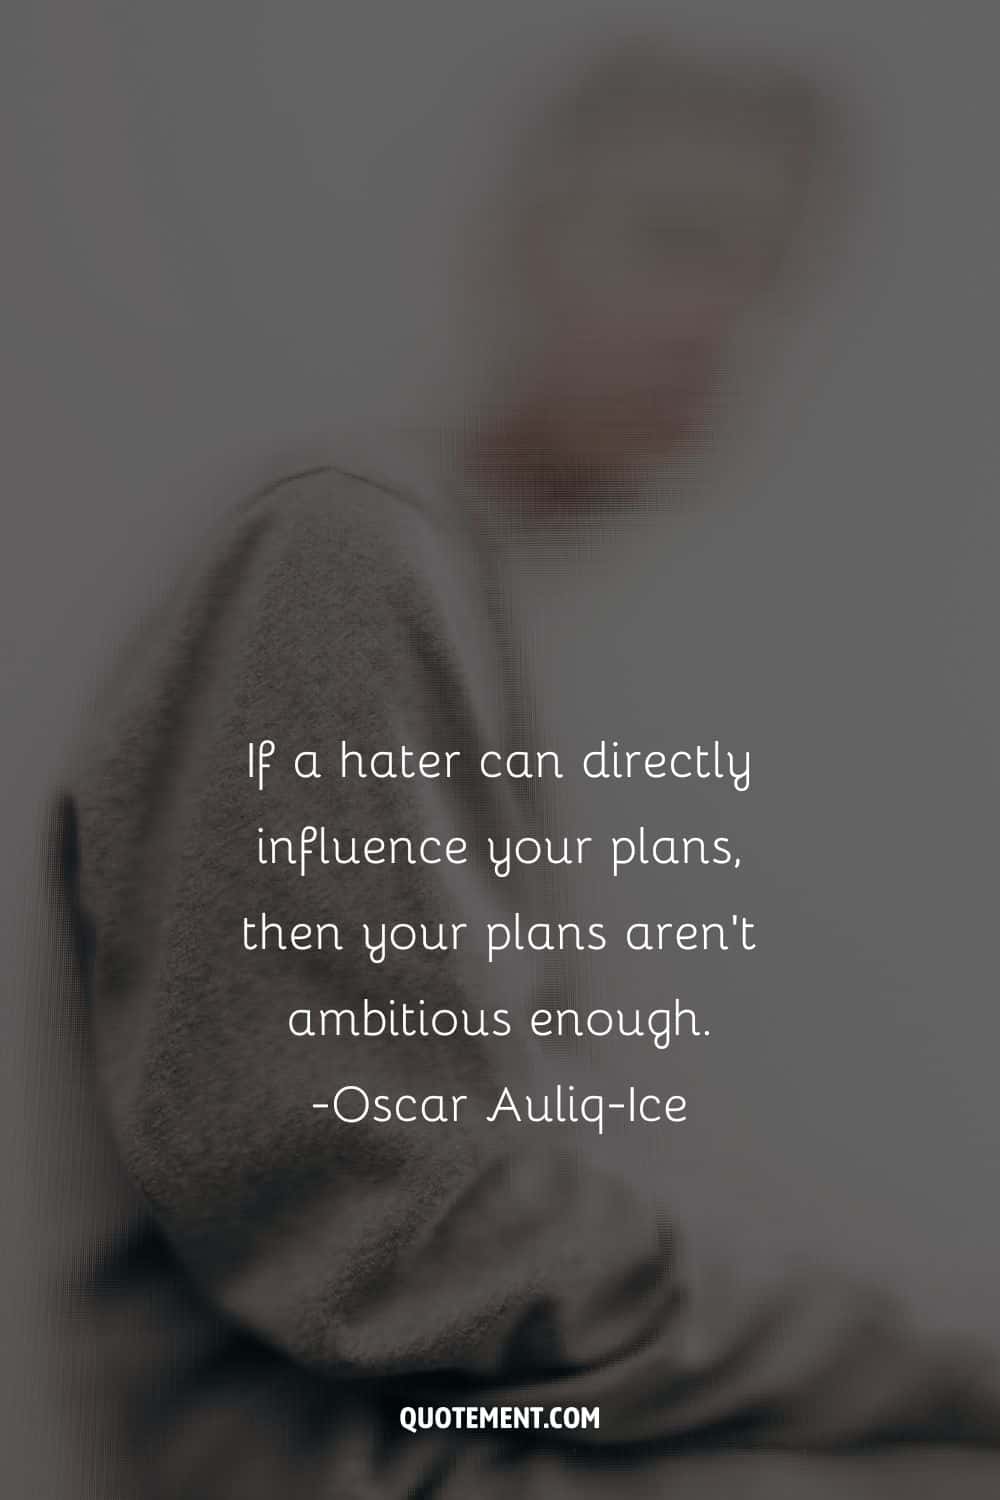 If a hater can directly influence your plans, then your plans aren’t ambitious enough